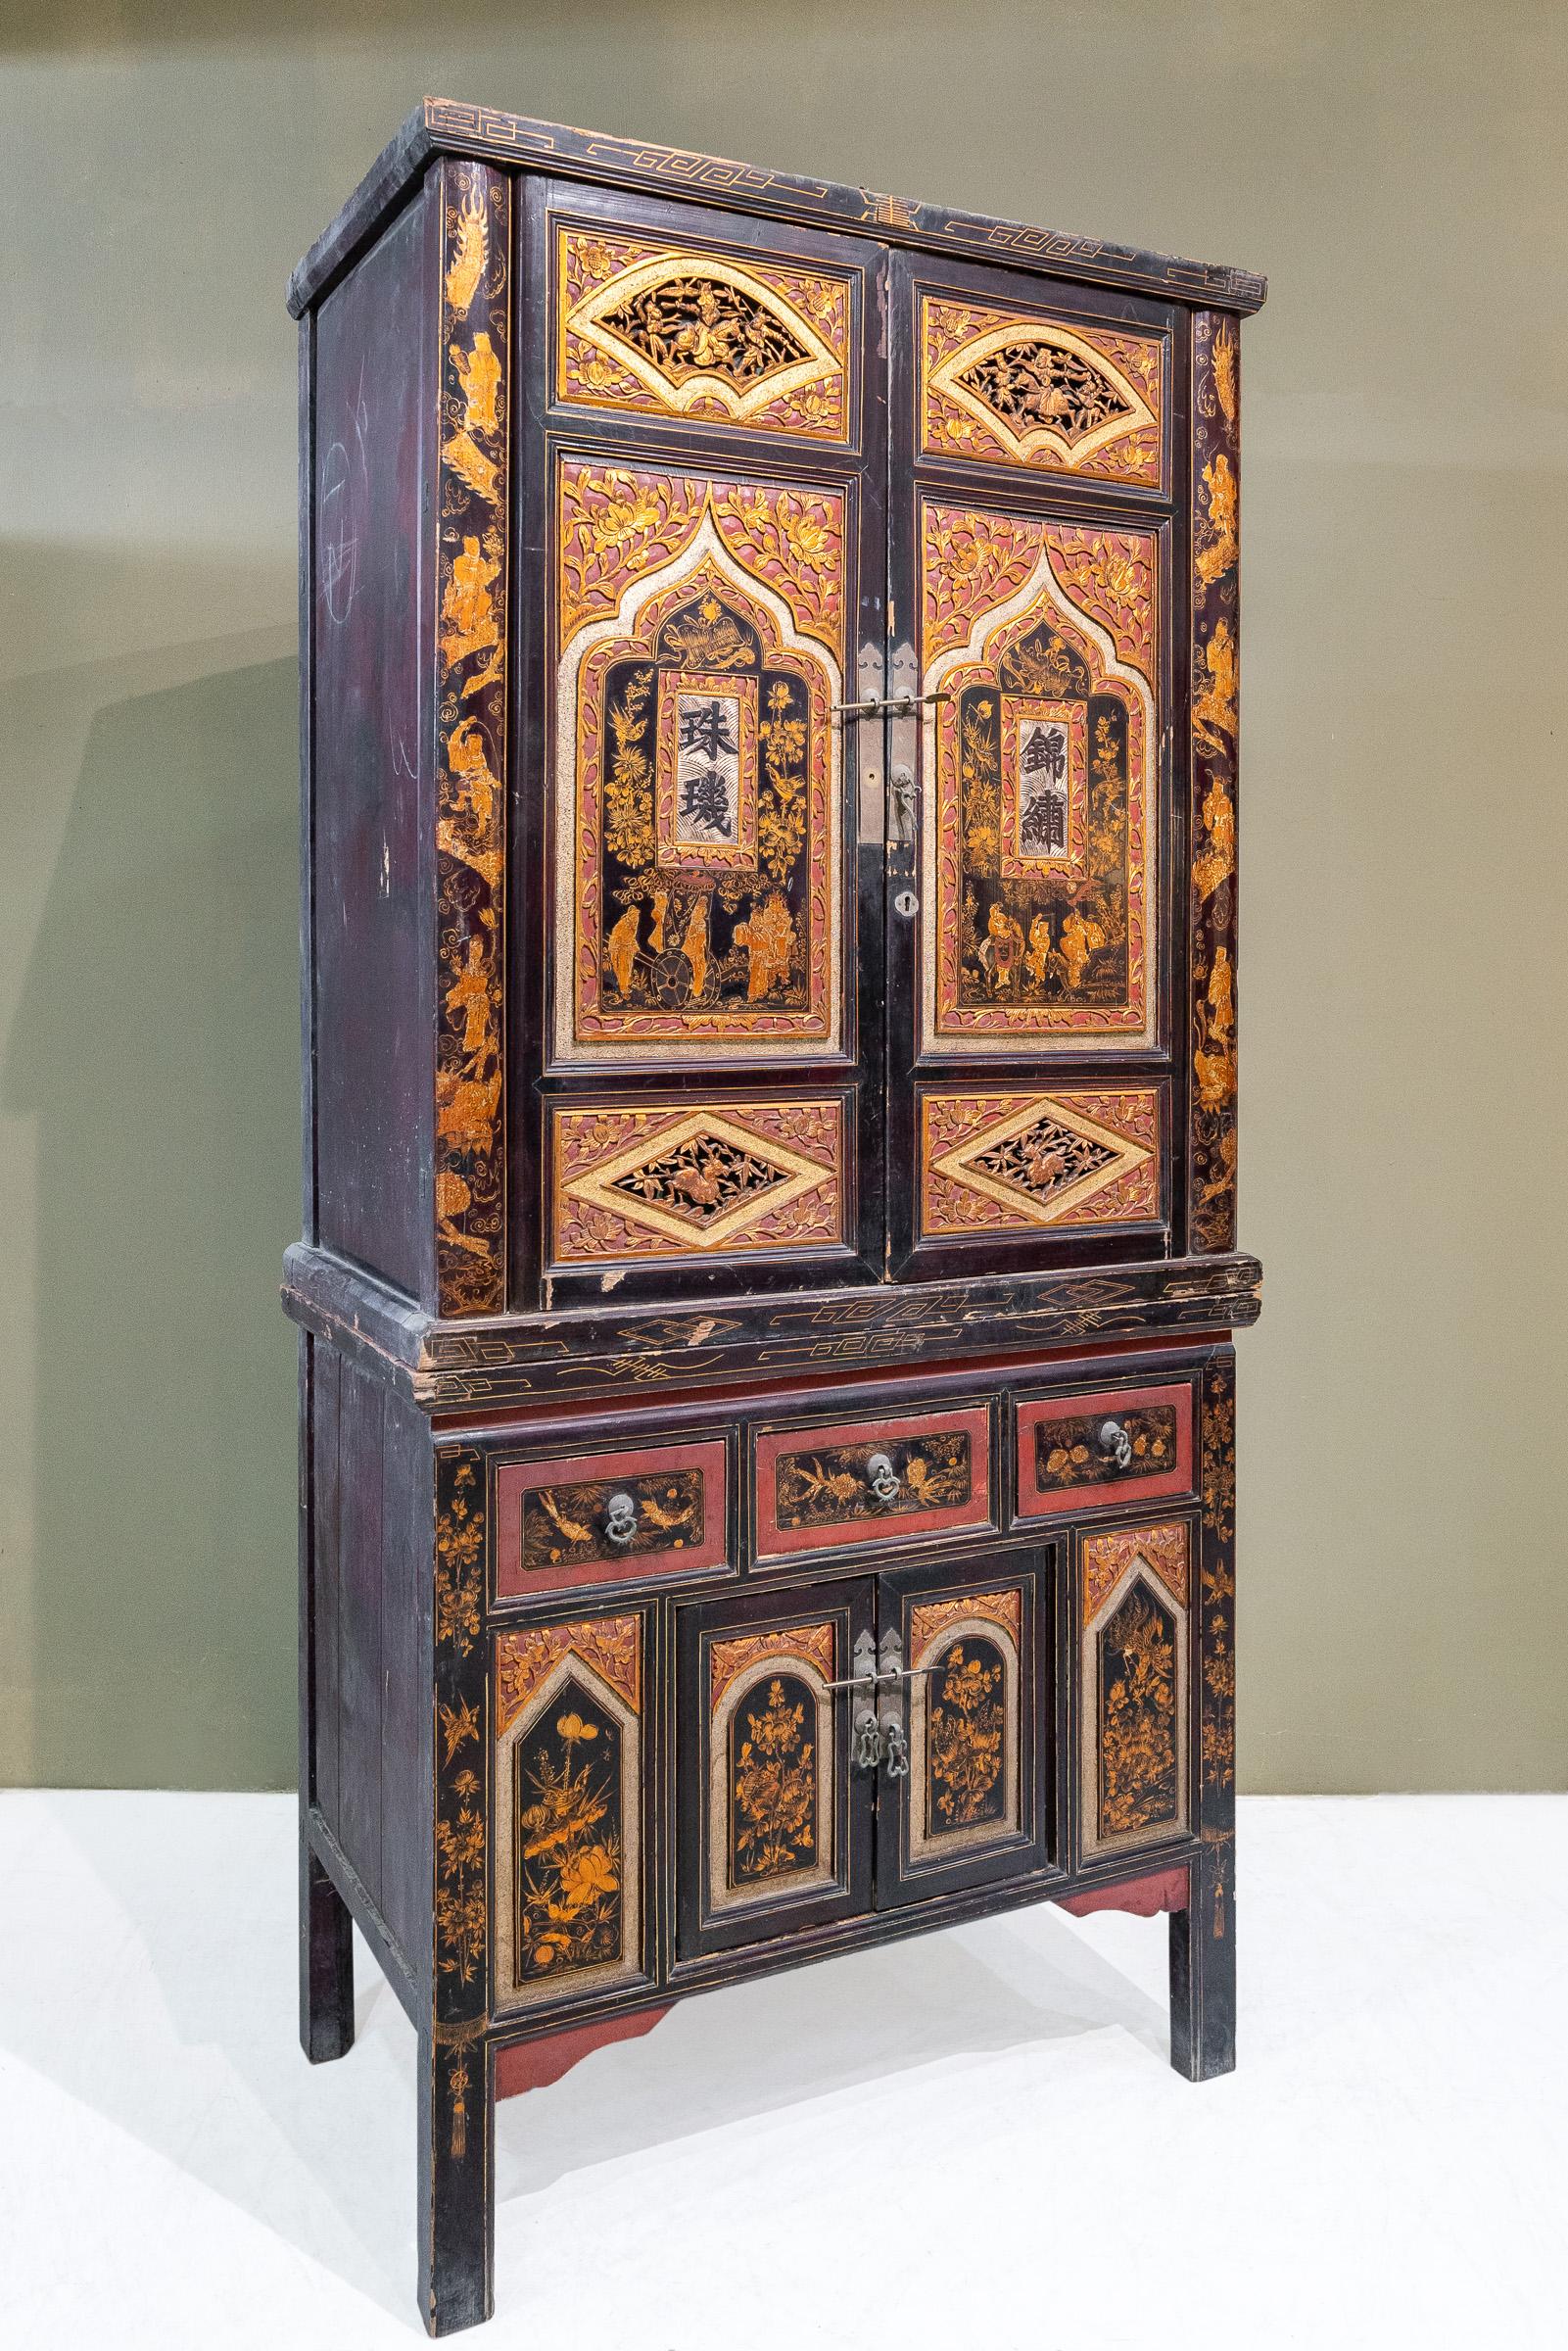 An early 20th century 2-tier carved cabinet from Fujian province, specifically Quanzhou city, China. 
This is a very unusual cabinet as it is much more decorated than usual. 
On the top section, on both sides of the cabinet frame are paintings of